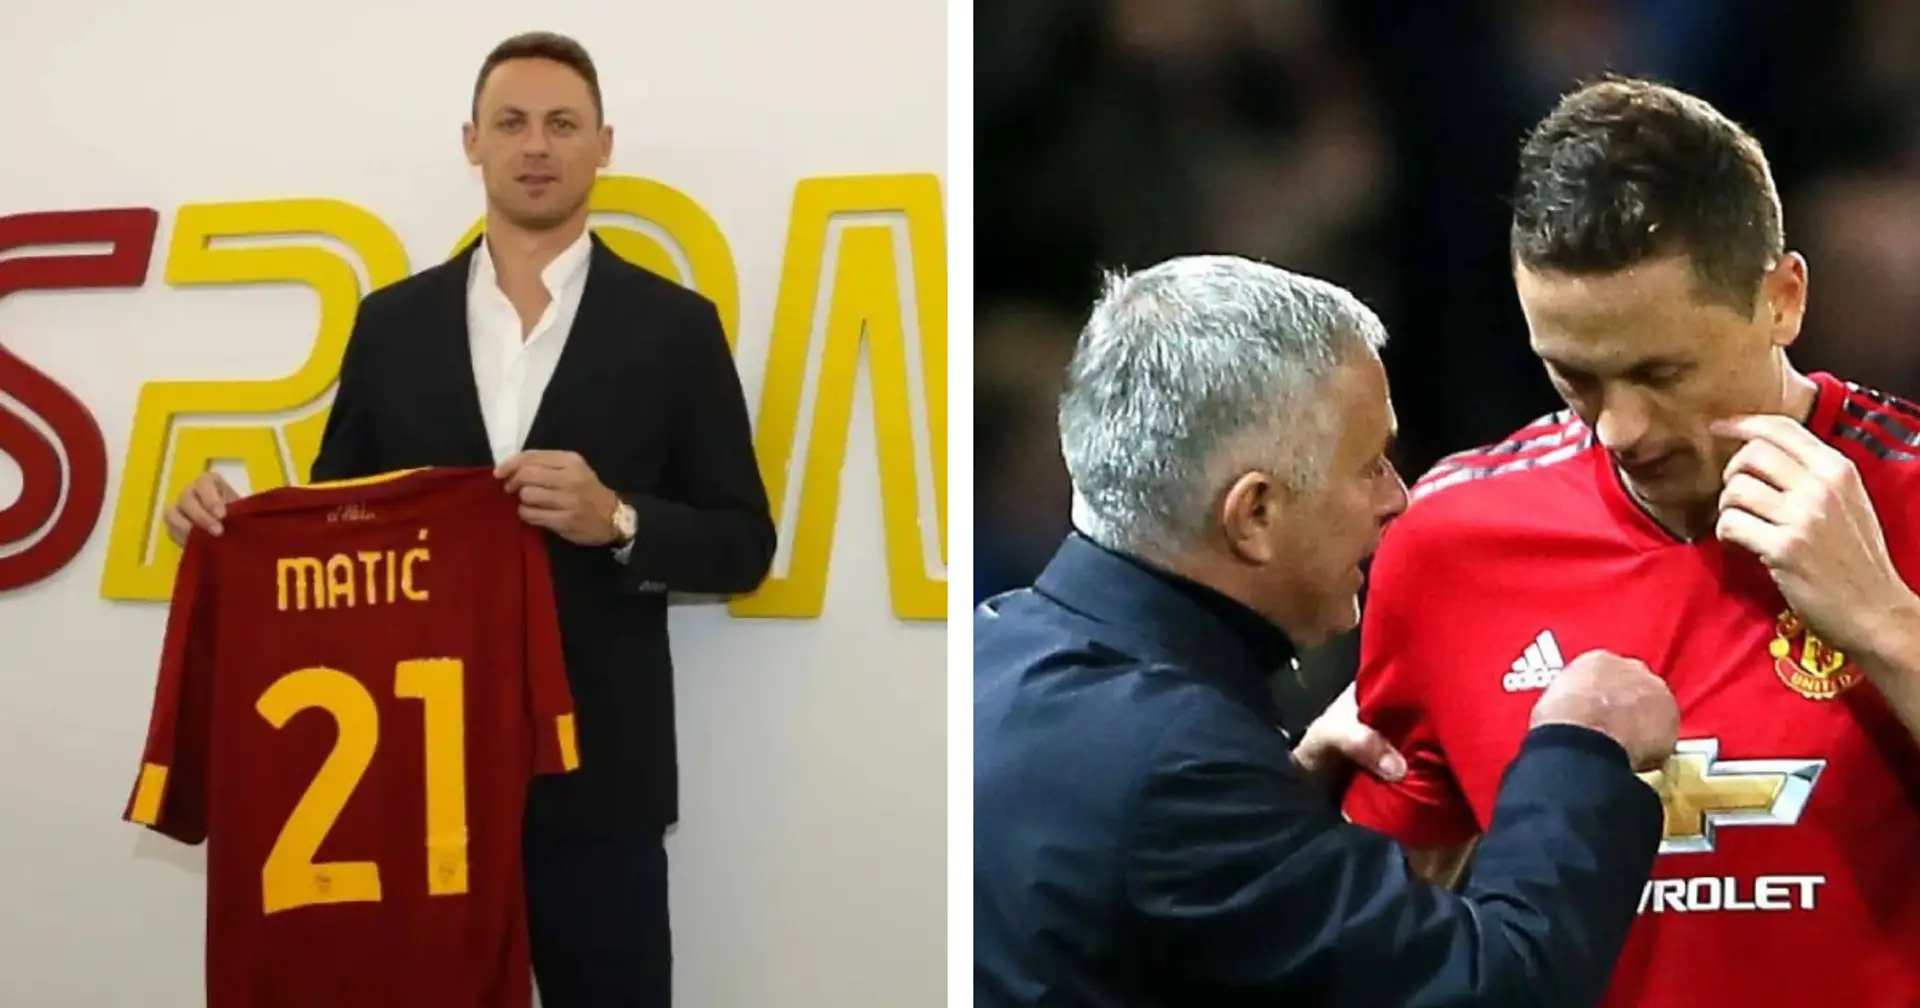 'Making the decision to come here very straightforward': Matic looks forward to Jose Mourinho reunion